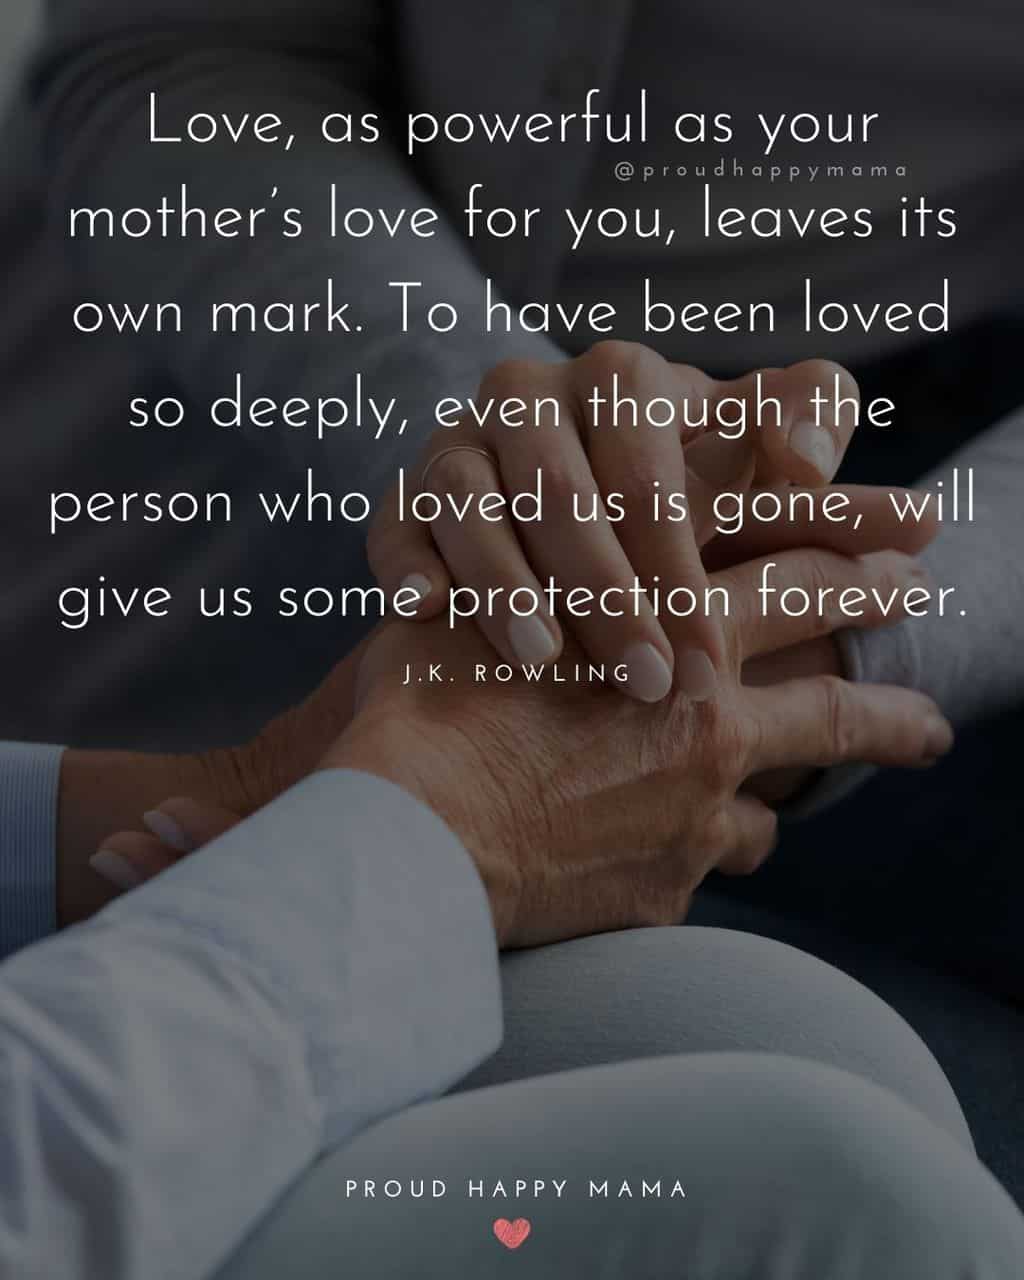 Elderly mother and daughter holding hand in lap with loss of mom quote text overlay. ‘Love as powerful as your mother’s for you leaves its own mark. To have been loved so deeply, even though the person who loved us is gone, will give us some protection forever.’ – J.K. Rowling